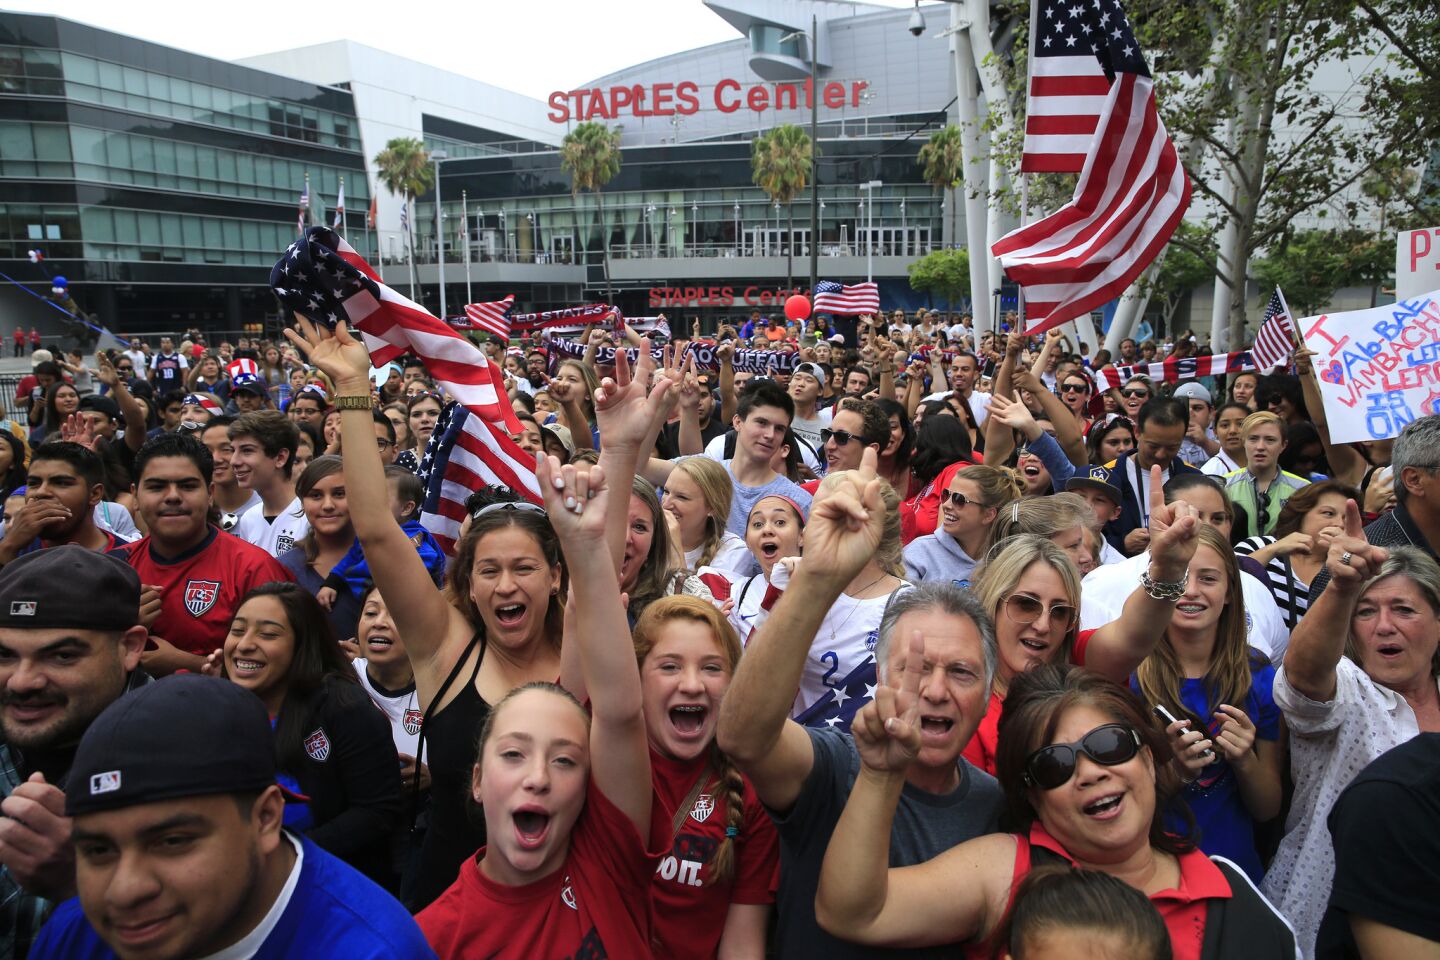 Fans are fired up at the chance to honor the U.S. women's soccer team in its first public appearance since winning the World Cup.